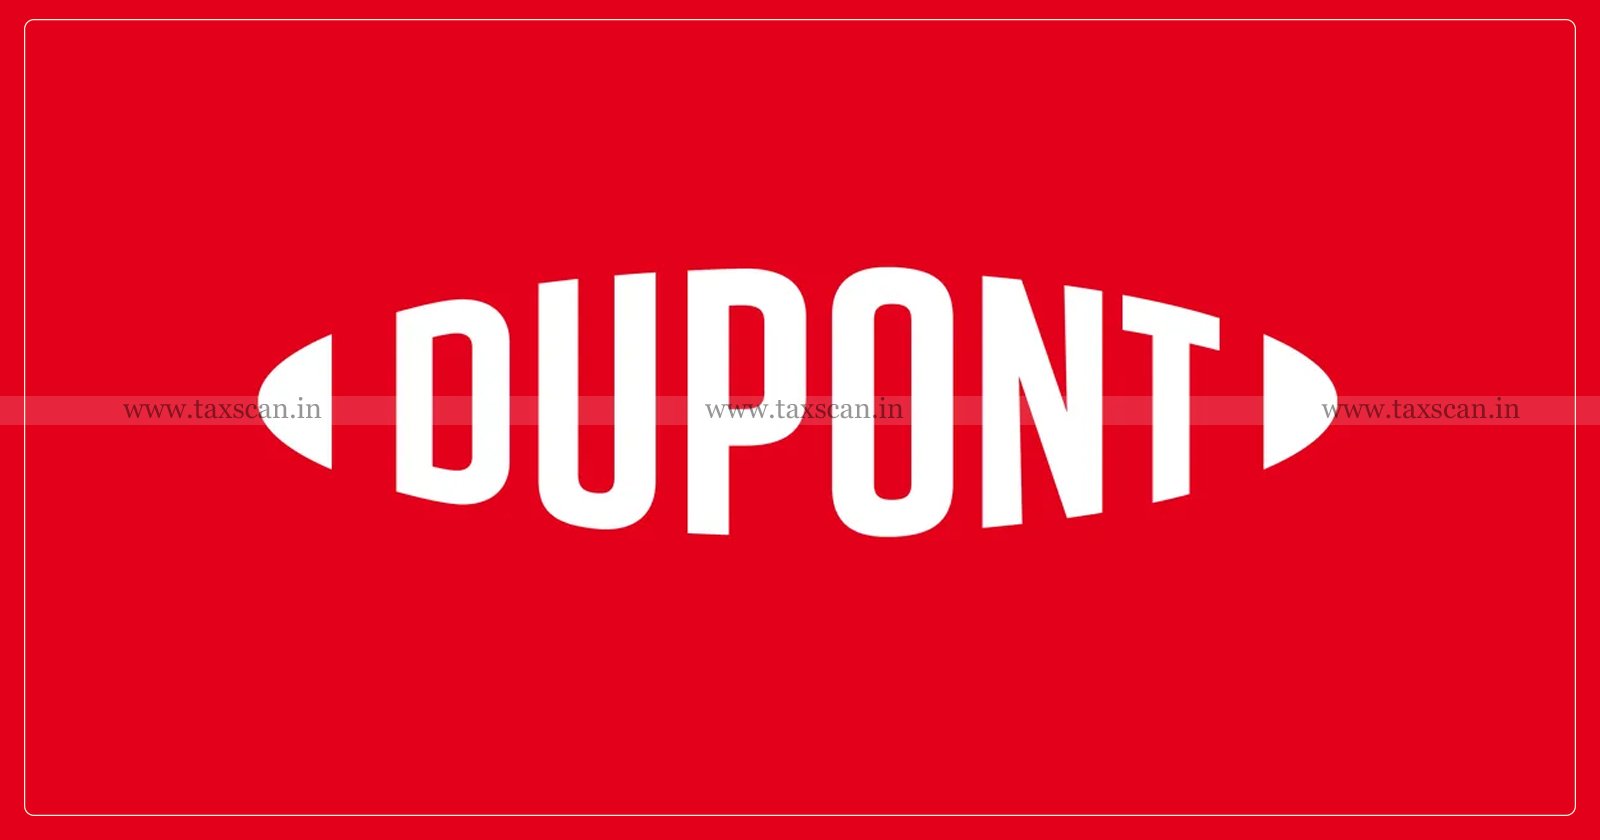 CMA Vacancy in Dupont - CMA Hiring in Dupont - CMA Opportunities in Dupont - Jobscan - taxscan